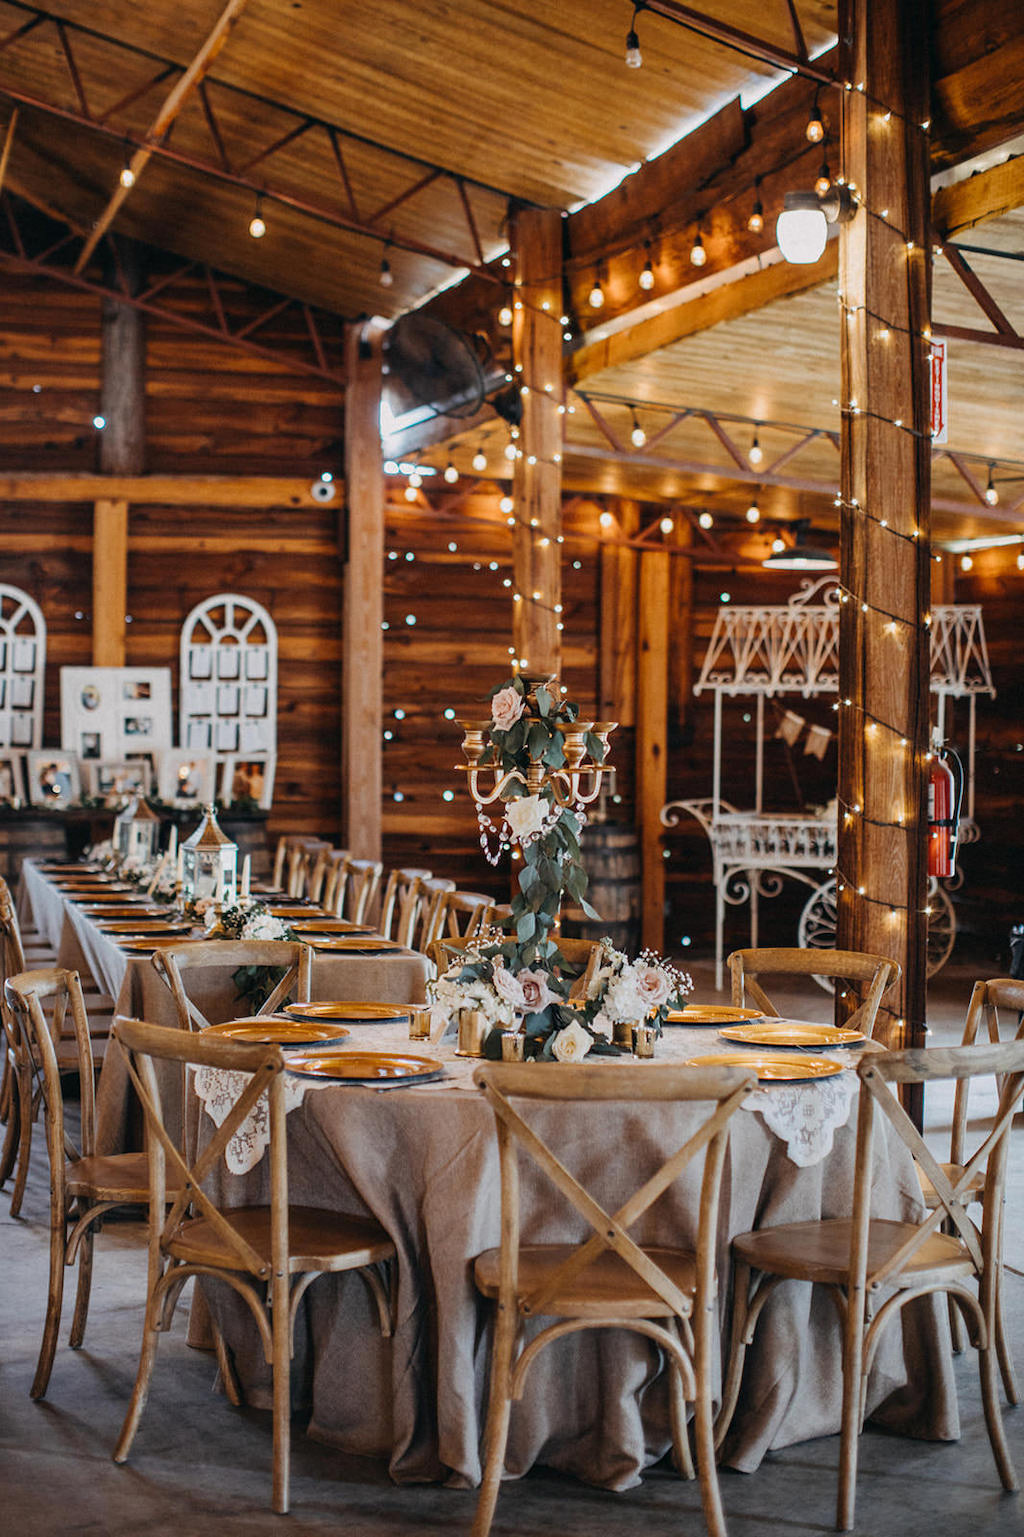 Florida Rustic Barn Inspired Wedding Reception Decor, Round Table with Tan Tablecloths, Gold Chargers, Wooden Chiavari Chairs, Tall Gold Candlestick Holder with Greenery and Rose Floral Centerpiece | Lakeland Rustic Barn Wedding Venue Florida Rustic Barn Inspired Wedding Reception, Long Feasting Tables with Wooden Chiavari Chairs | Lakeland Rustic Barn Wedding Venue Florida Rustic Inspired Wedding Reception Decor, Metal White Wagon, Wooden Barrel Welcome Table with Pictures and Window Pane Seating Chart | Lakeland Rustic Barn Wedding Venue Florida Outdoor Rustic Inspired Bride and Groom Wedding Portrait | Lakeland Rustic Wedding Venue The Prairie Glenn Barn at Gable Oaks Ranch